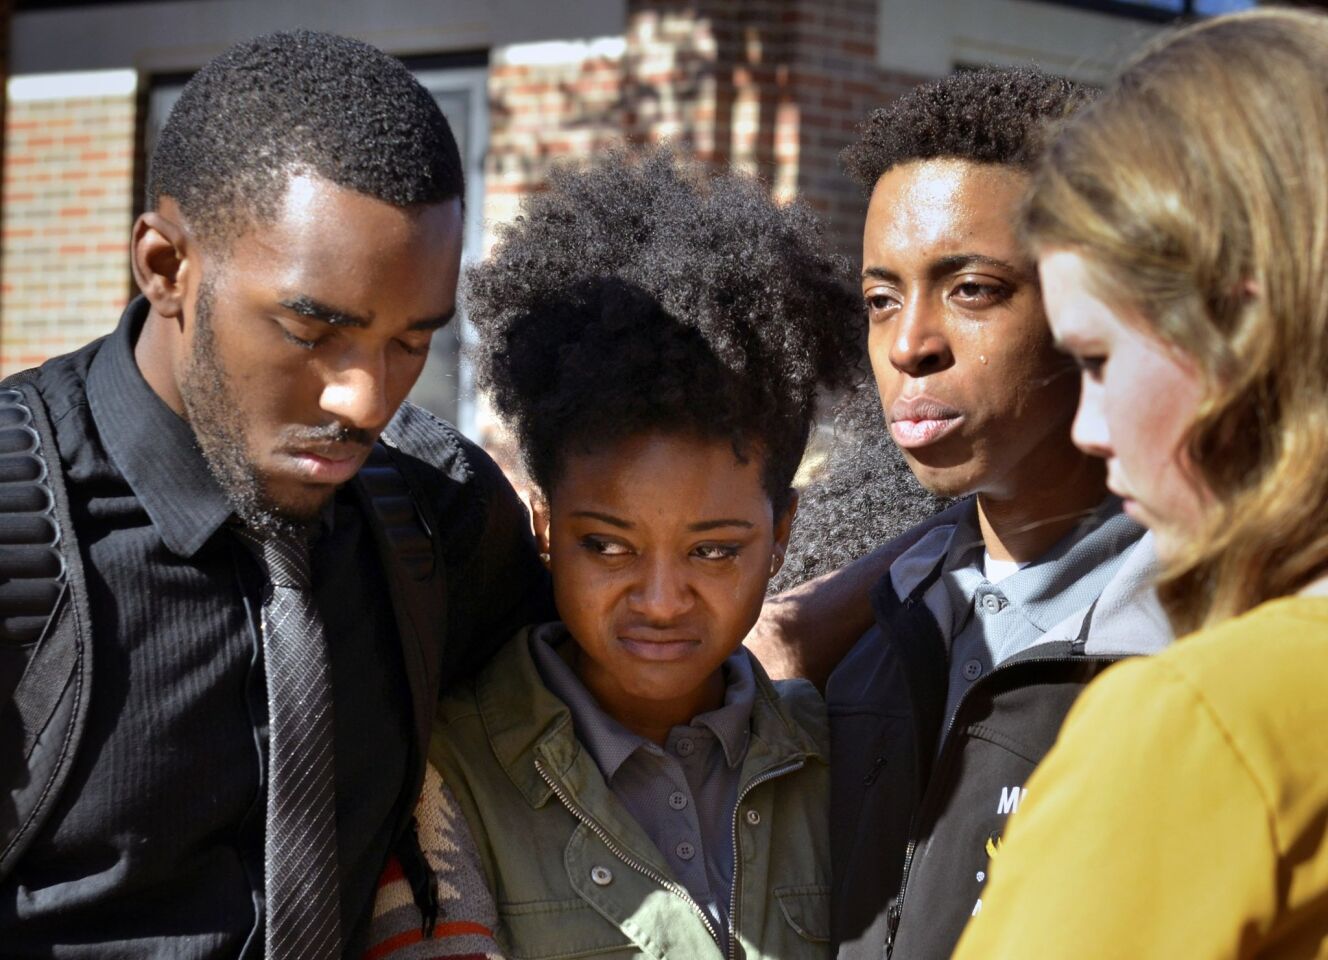 Members of the Legion of Black Collegians and the Concerned Student 1950 supporters gather outside the Reynolds Alumni Center after an emotional protest on the University of Missouri campus in Columbia, Mo.